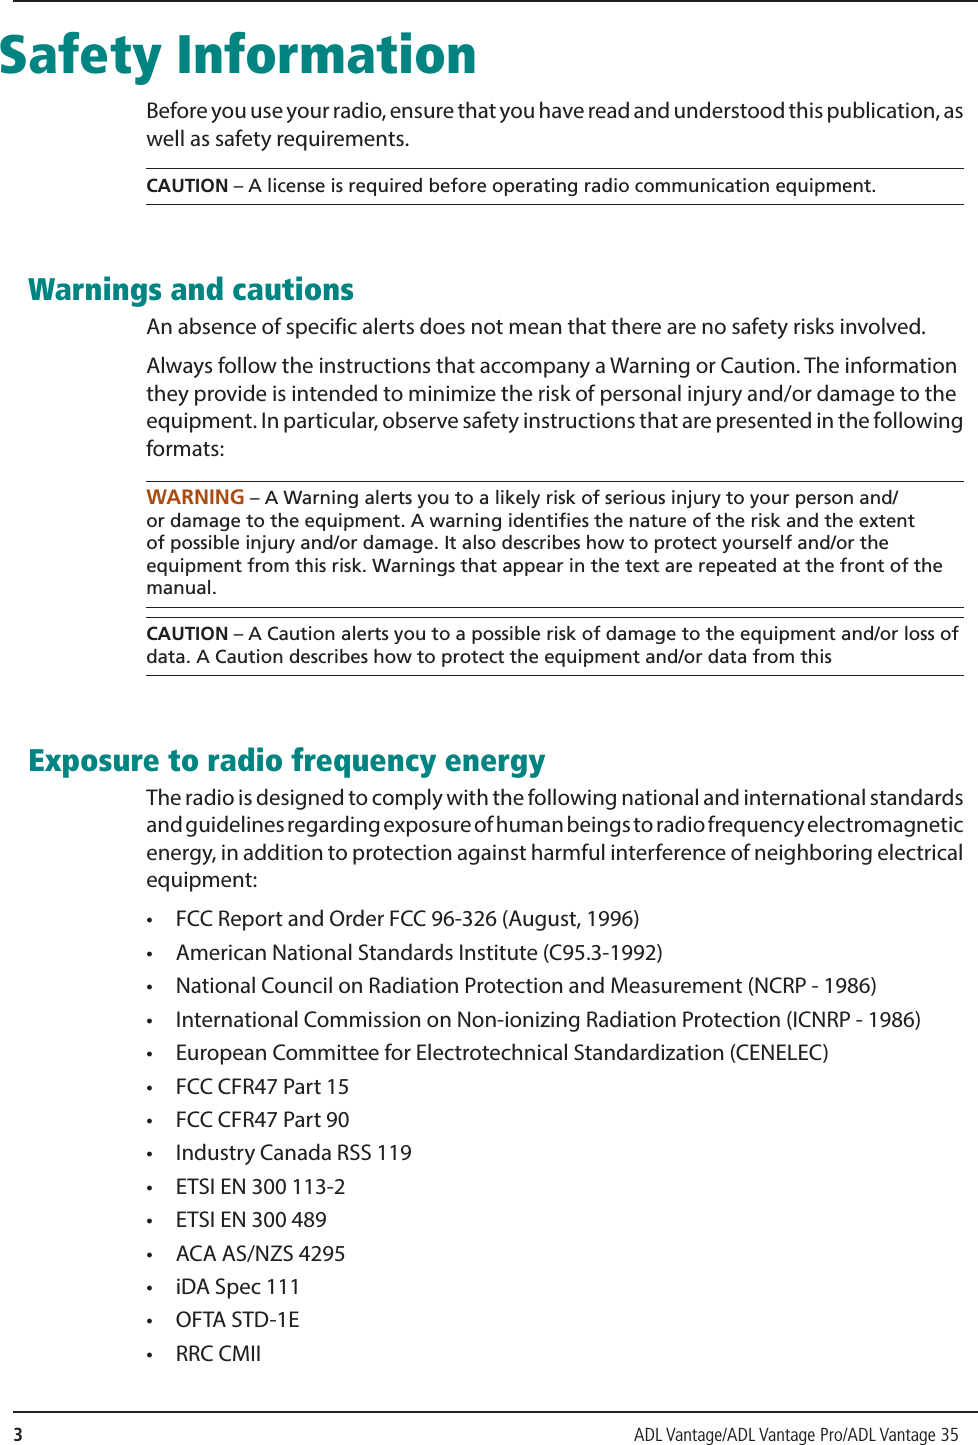 3                ADL Vantage/ADL Vantage Pro/ADL Vantage 35  Safety InformationBefore you use your radio, ensure that you have read and understood this publication, as well as safety requirements.CAUTION – A license is required before operating radio communication equipment. Warnings and cautionsAn absence of specific alerts does not mean that there are no safety risks involved.Always follow the instructions that accompany a Warning or Caution. The information they provide is intended to minimize the risk of personal injury and/or damage to the equipment. In particular, observe safety instructions that are presented in the following formats:WARNING – A Warning alerts you to a likely risk of serious injury to your person and/or damage to the equipment. A warning identifies the nature of the risk and the extent of possible injury and/or damage. It also describes how to protect yourself and/or the equipment from this risk. Warnings that appear in the text are repeated at the front of the manual.CAUTION – A Caution alerts you to a possible risk of damage to the equipment and/or loss of data. A Caution describes how to protect the equipment and/or data from this Exposure to radio frequency energyThe radio is designed to comply with the following national and international standards and guidelines regarding exposure of human beings to radio frequency electromagnetic energy, in addition to protection against harmful interference of neighboring electrical equipment:•  FCC Report and Order FCC 96-326 (August, 1996)•  American National Standards Institute (C95.3-1992)•  National Council on Radiation Protection and Measurement (NCRP - 1986)•  International Commission on Non-ionizing Radiation Protection (ICNRP - 1986)•  European Committee for Electrotechnical Standardization (CENELEC)•  FCC CFR47 Part 15•  FCC CFR47 Part 90•  Industry Canada RSS 119•  ETSI EN 300 113-2•  ETSI EN 300 489•  ACA AS/NZS 4295•  iDA Spec 111• OFTA STD-1E• RRC CMII